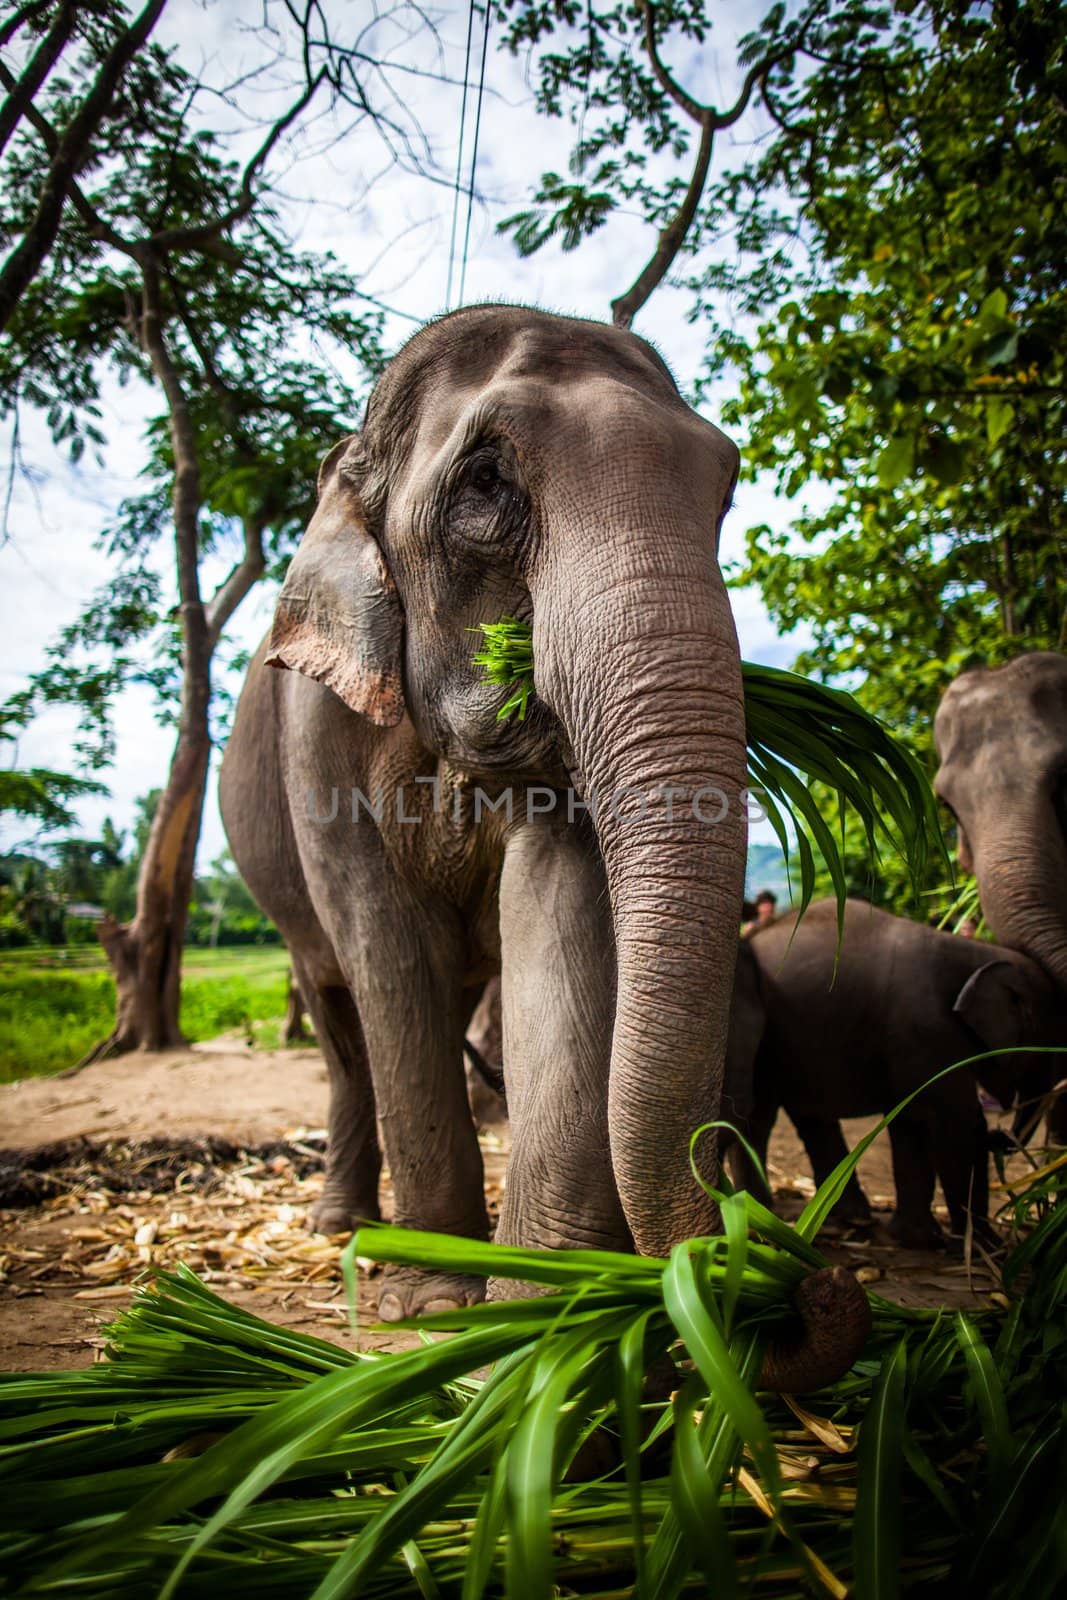 CHIANG MAI, THAILAND - June 16, 2012: Mature female elephant with sugarcane in its mouth eating off the ground. The Mahout Experience. Taking care of the elephant for a day in Chiang Mai, Thailand.